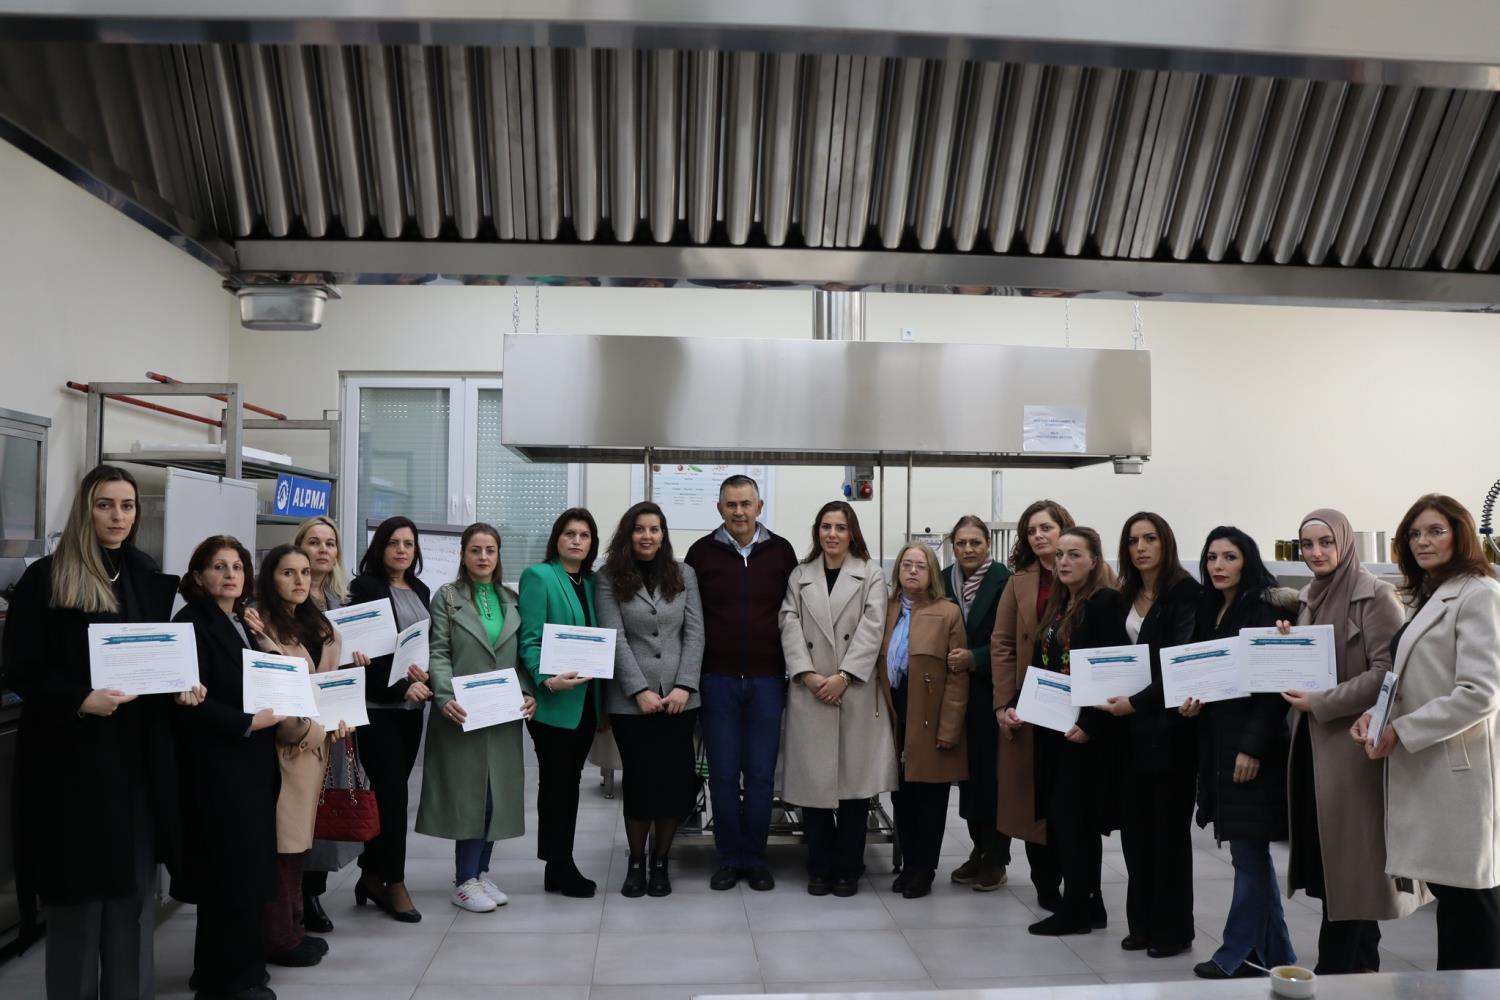 IADK certifies 15 candidates from the Municipality of Podujeva in the Sweets Making Program